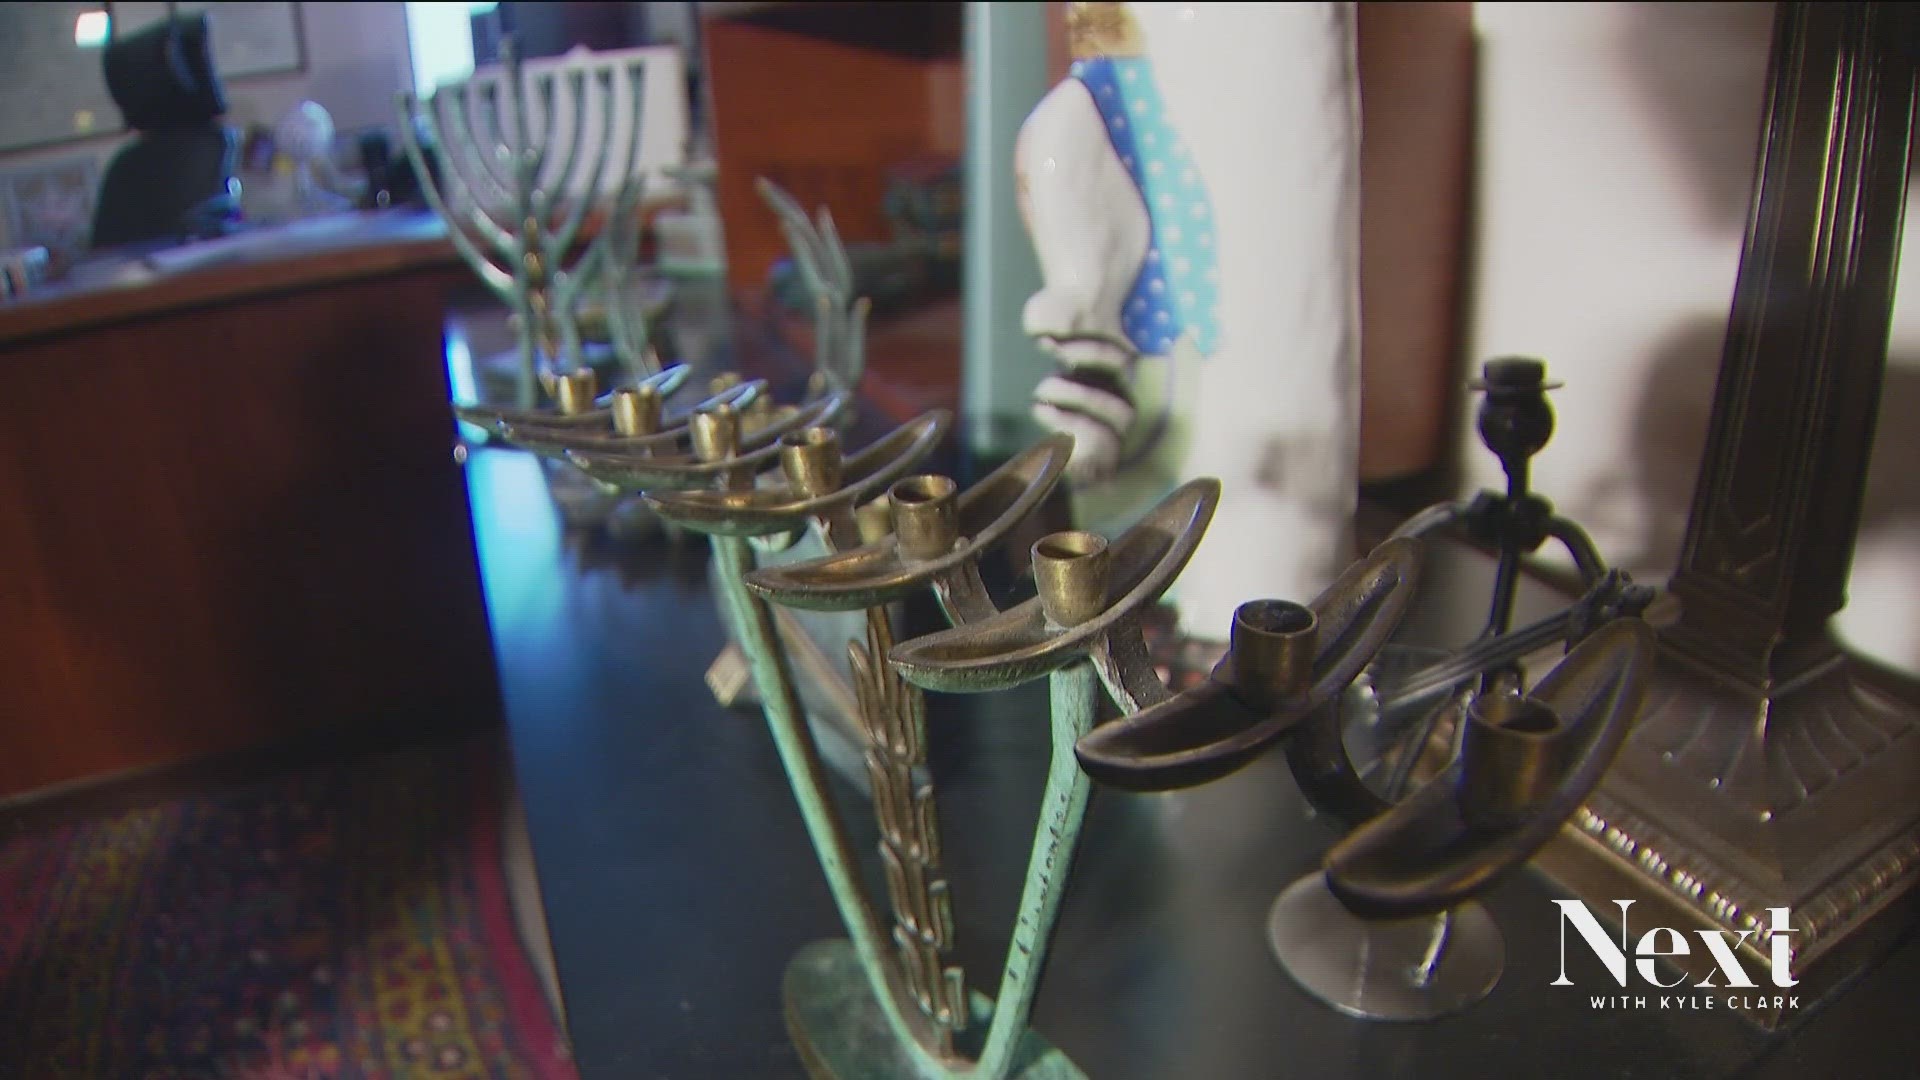 Hannukah begins Thursday evening. With war between Israel and Hamas - and rising antisemitism, Jewish leaders in Colorado say the holiday holds special meaning.